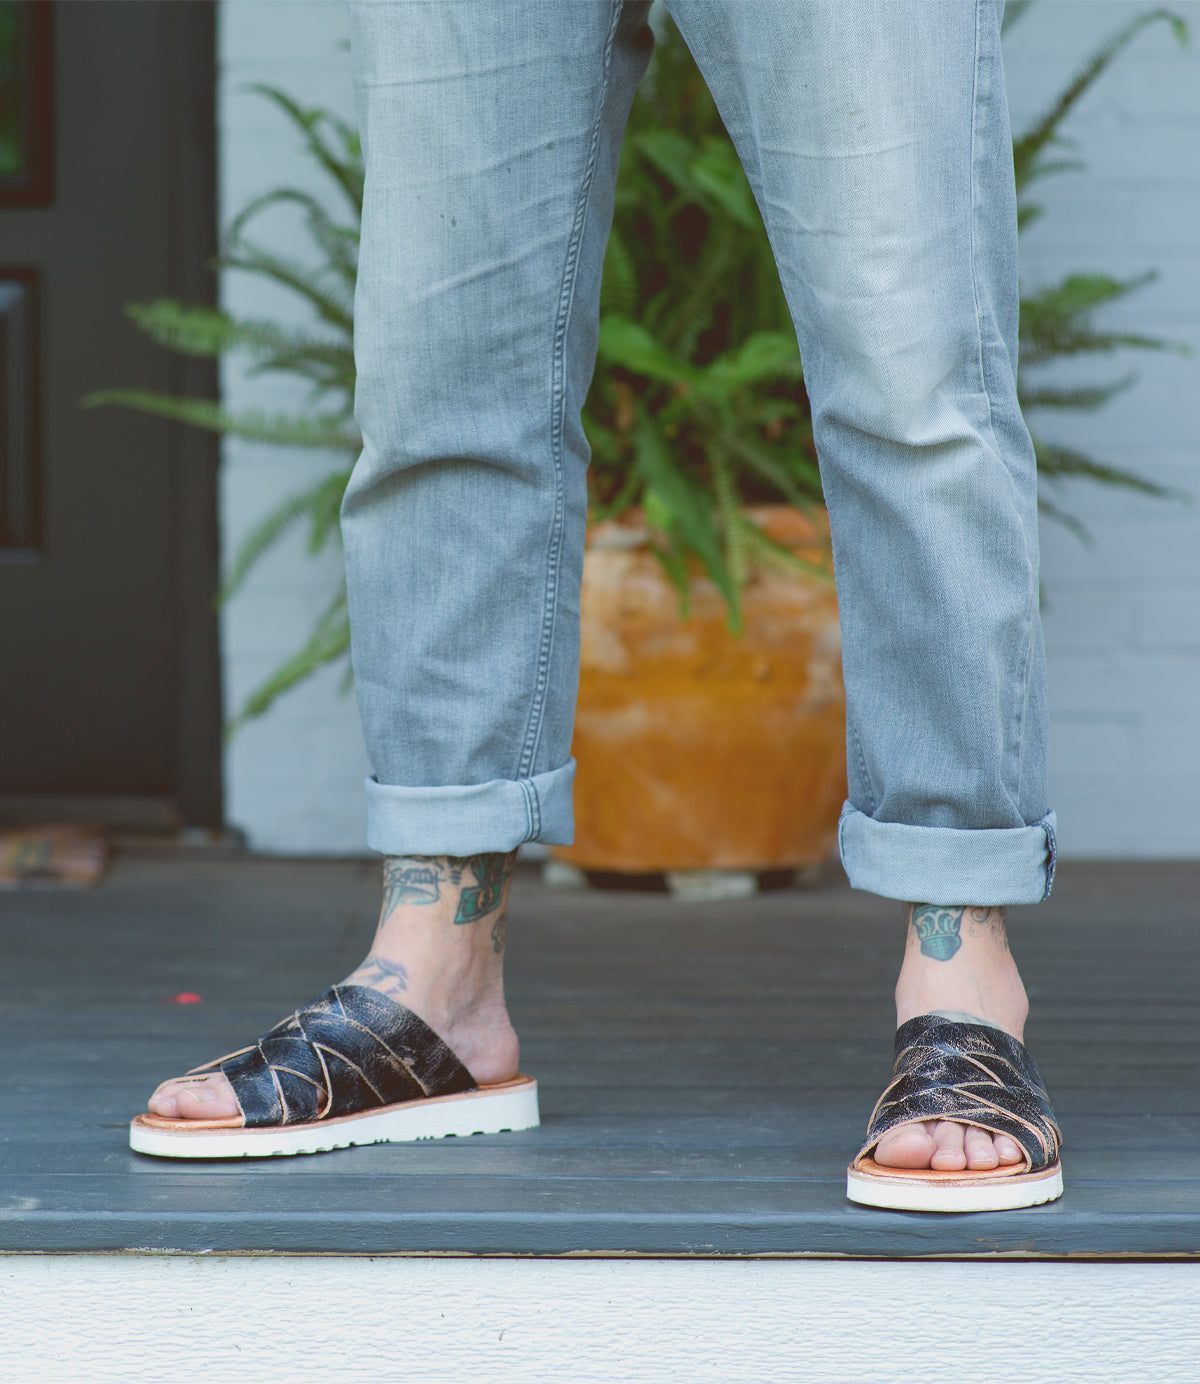 A person standing on a doorstep wearing jeans and Abraham Light Black Lux Sandals by Bed Stu with a woven upper, revealing tattooed ankles.